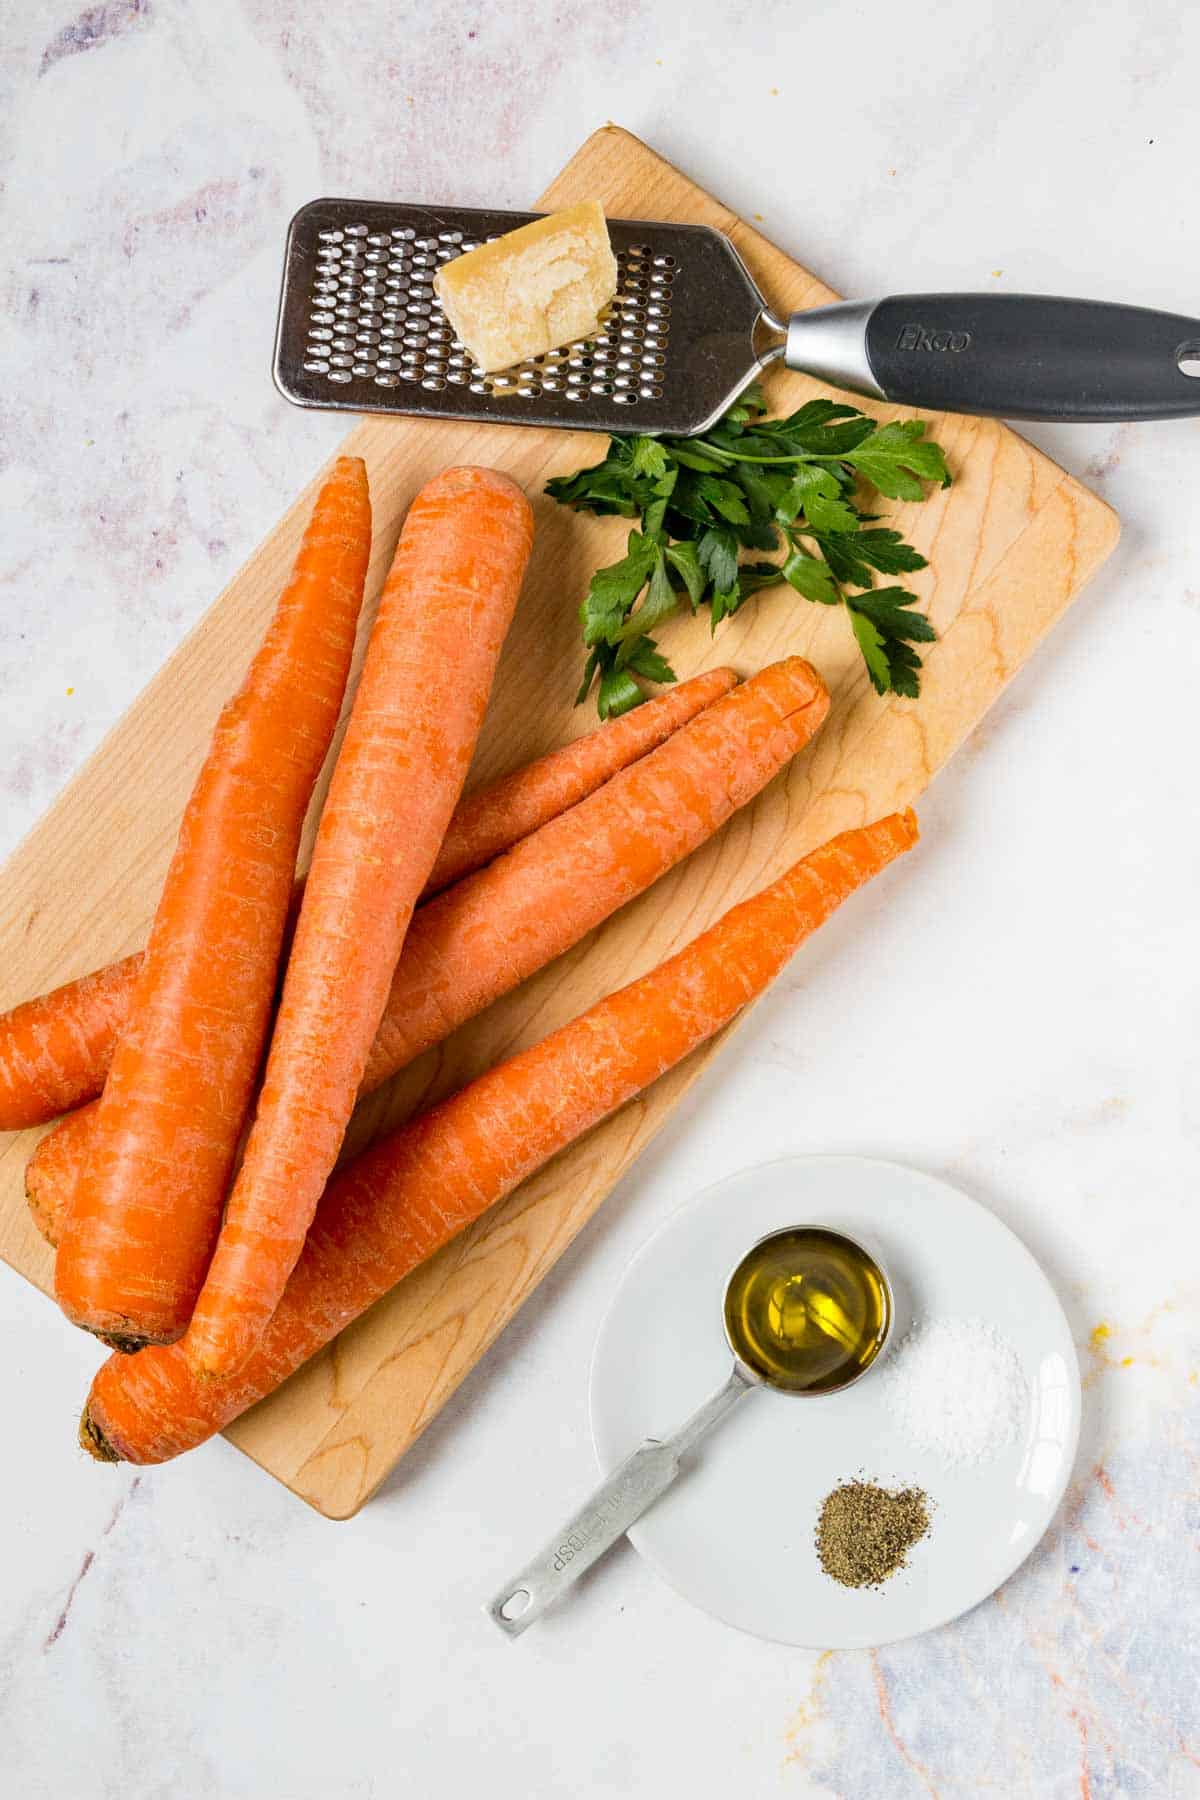 The ingredients for air fryer roasted carrots.